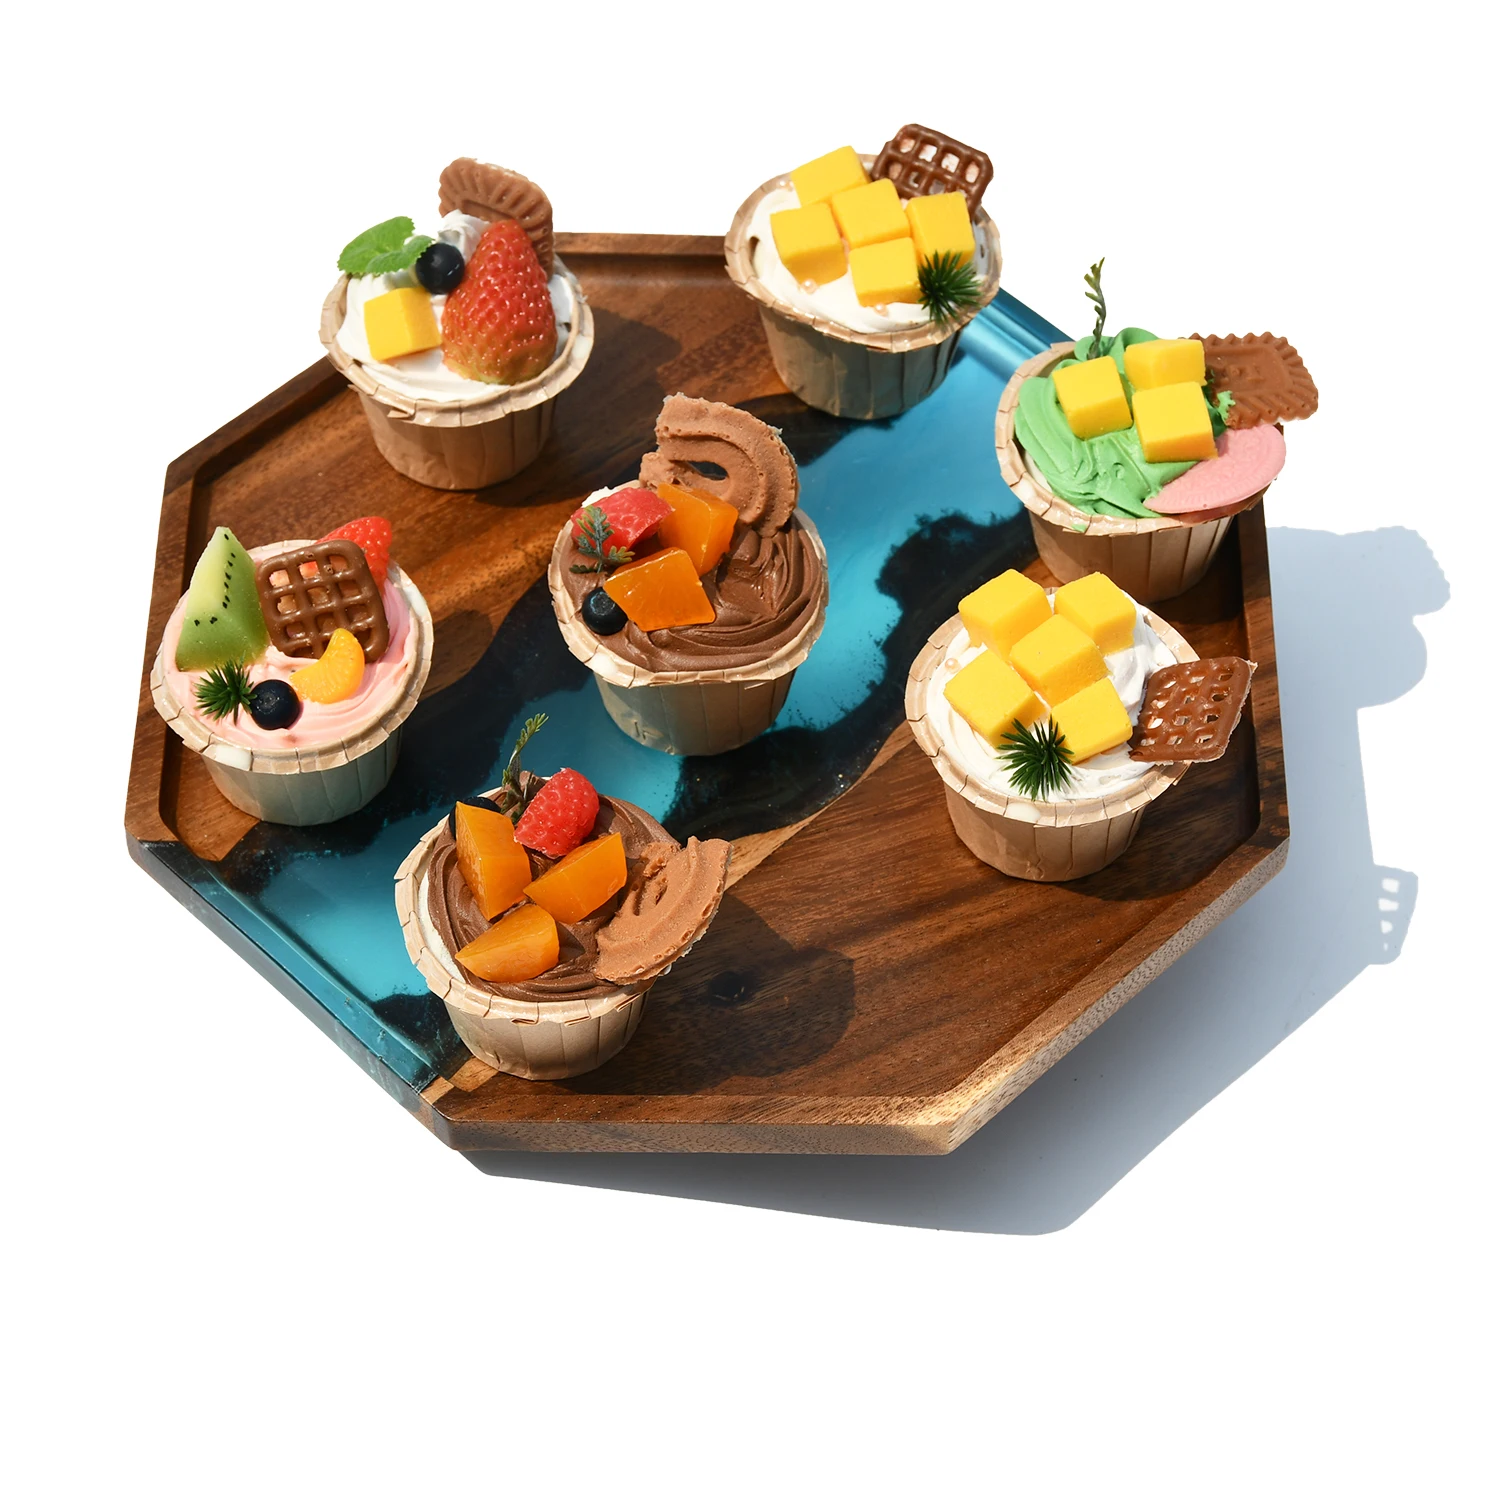 Biodegradable rhombus shape vintage style reusable food circular wooden serving tray for kitchen